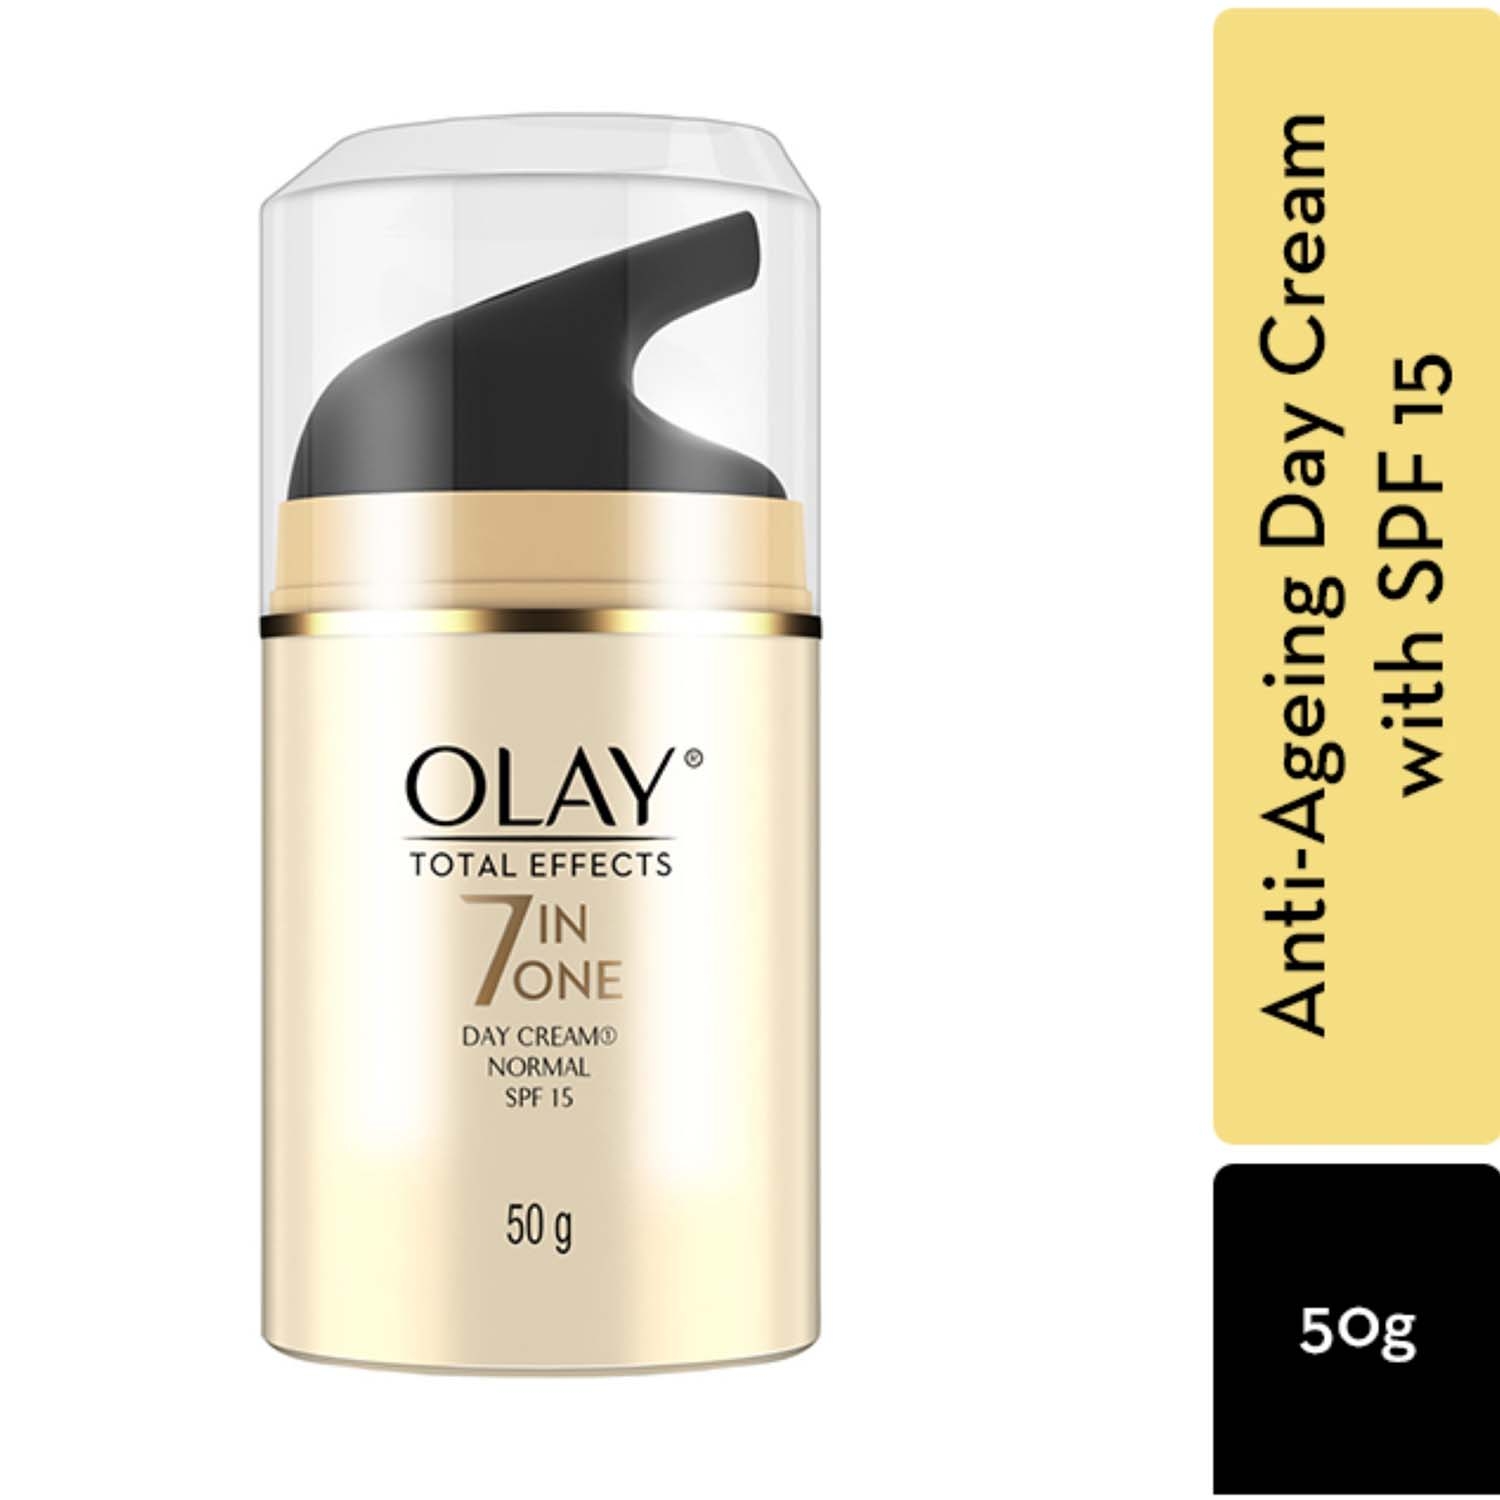 Olay 7-In-1 Total Effects Anti Ageing Day Cream SPF 15 (50g)